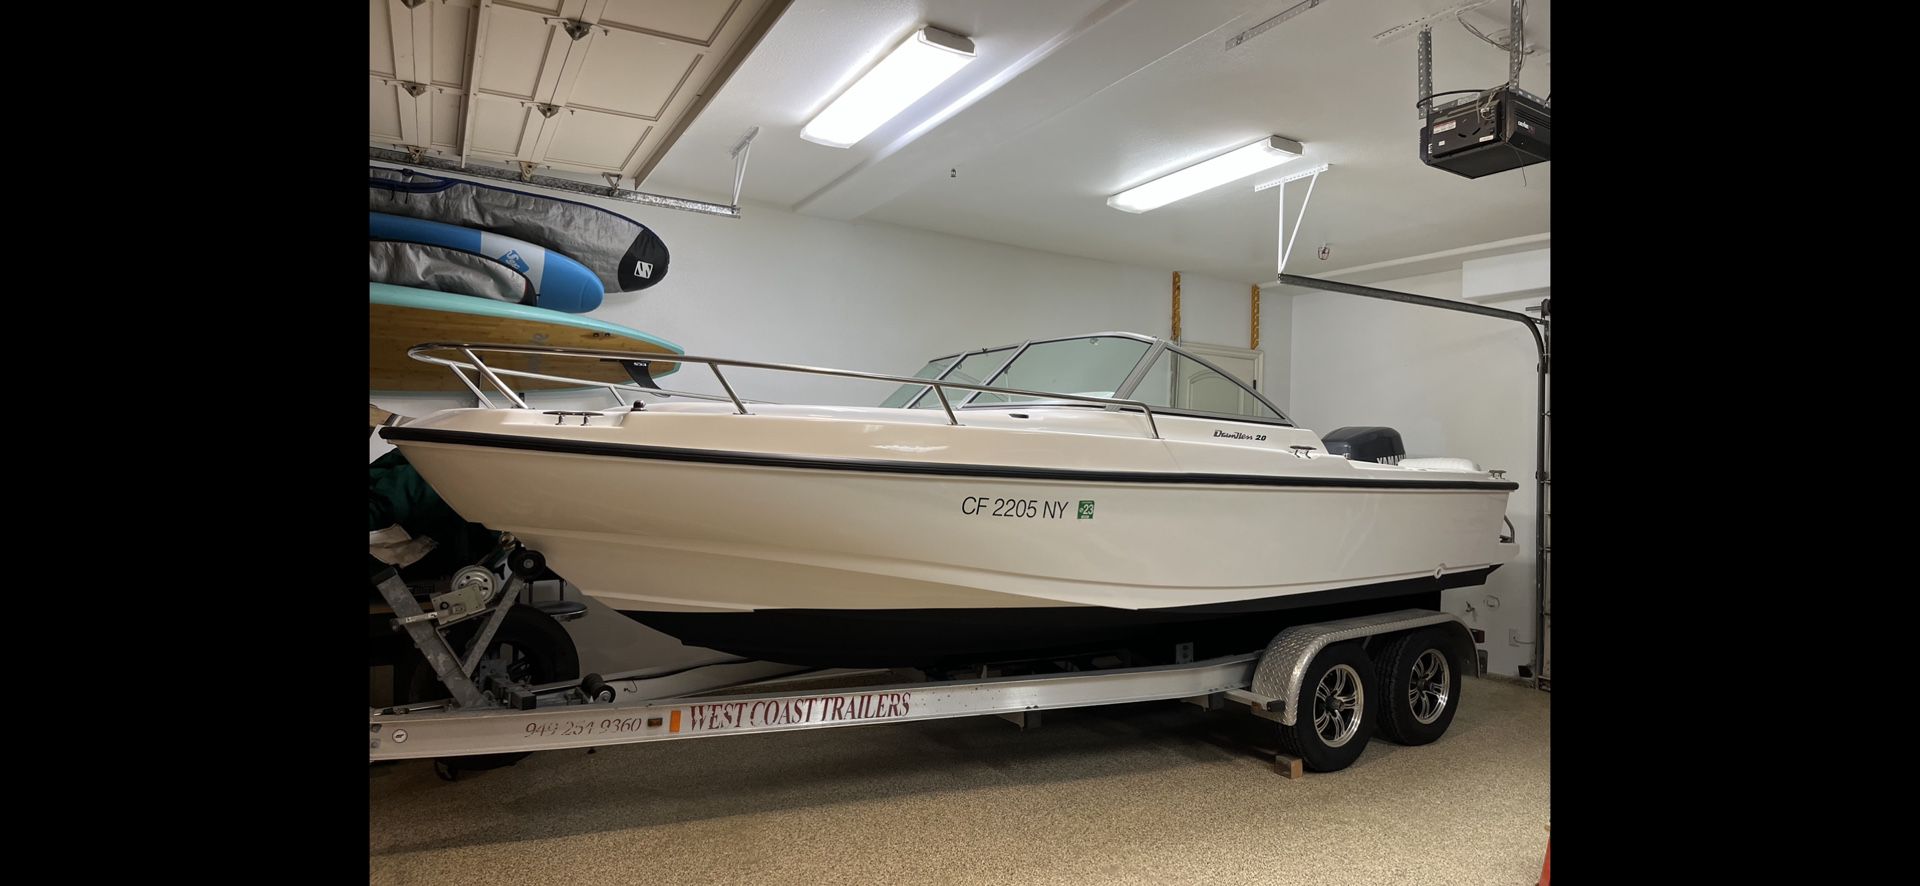 20’ Boston Whaler Dauntless Dual Console NEW CONDITION 